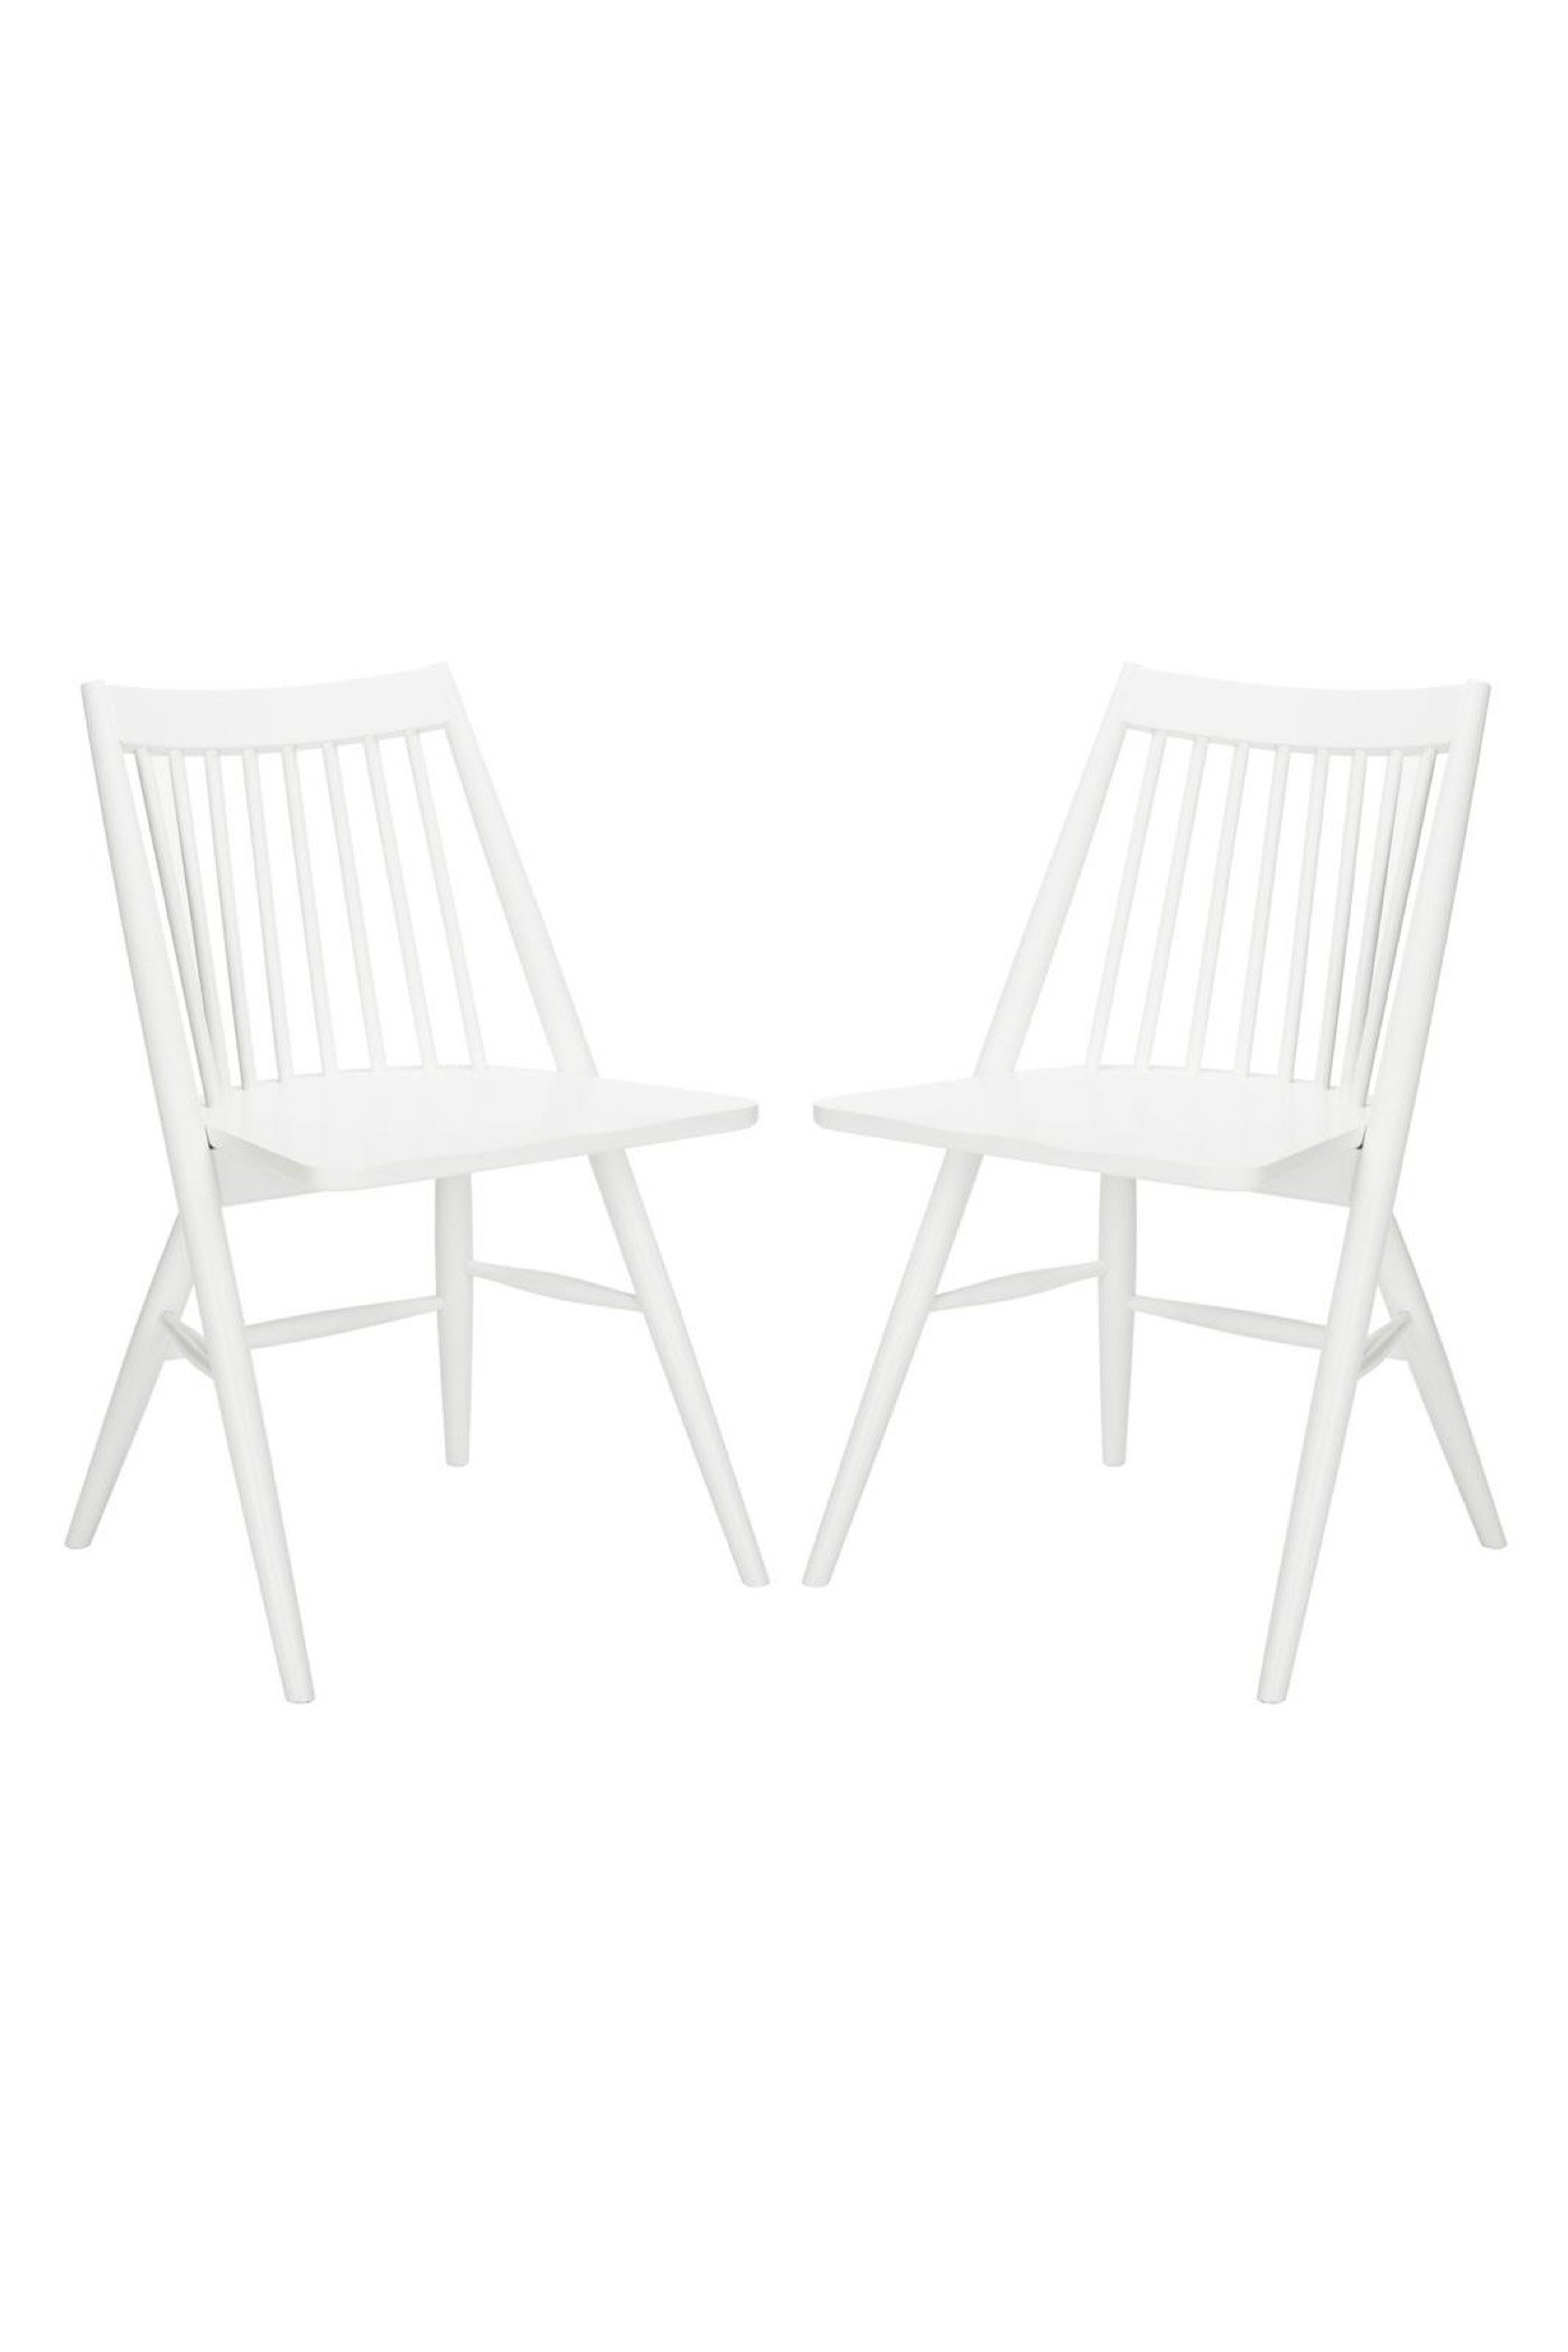 Ames Chairs, White, Set of 2 - Cove Goods